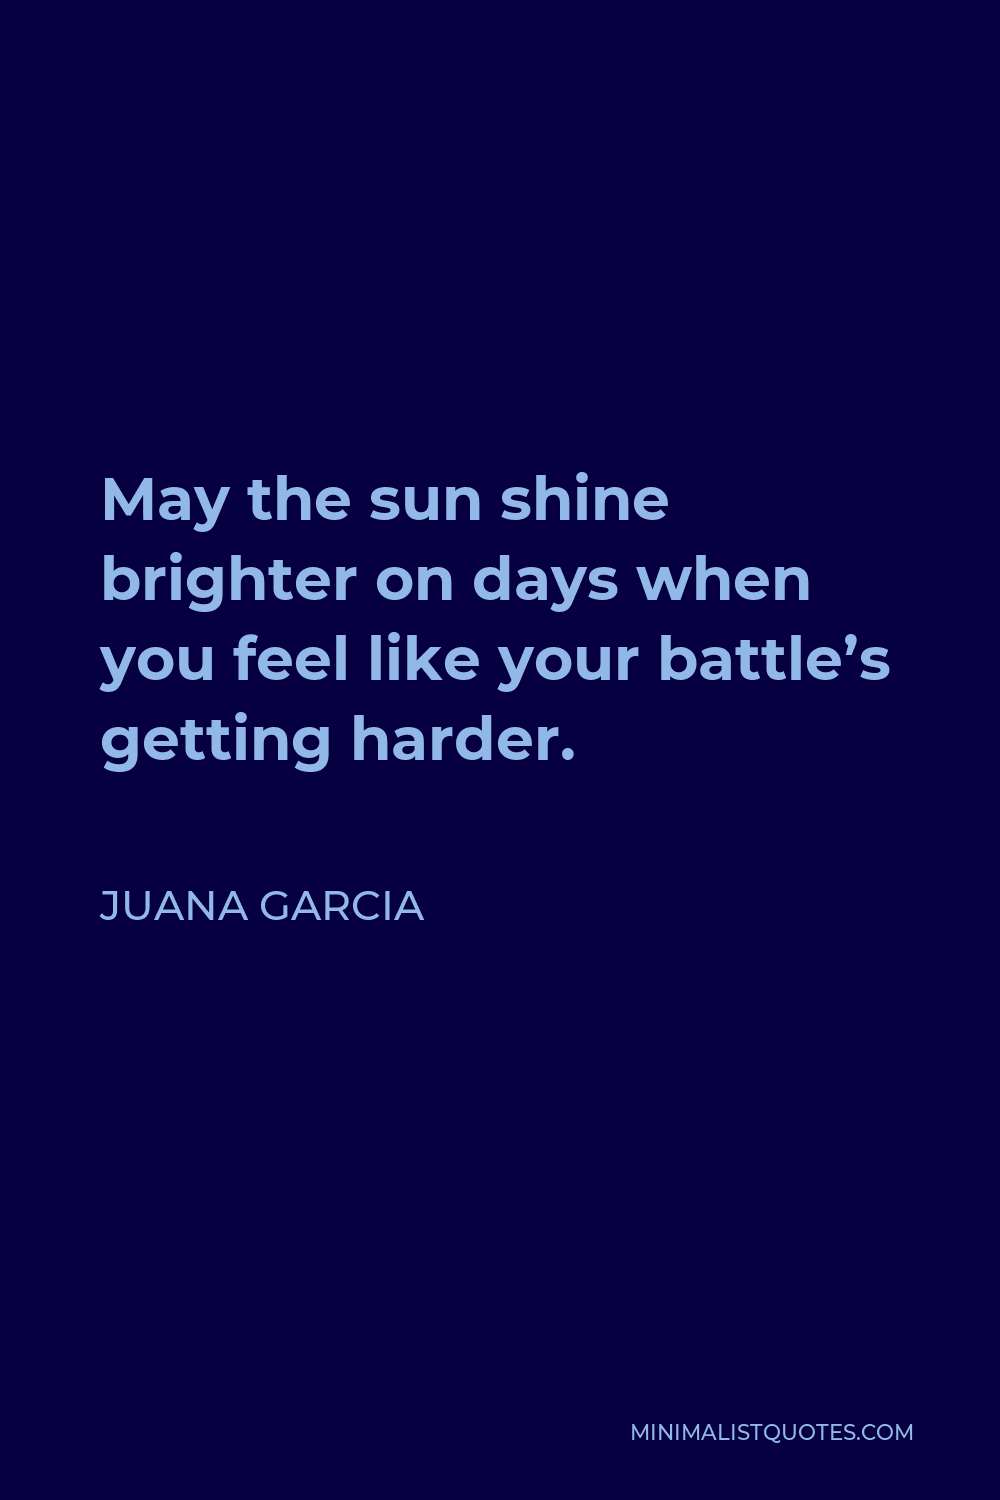 Juana Garcia Quote - May the sun shine brighter on days when you feel like your battle’s getting harder.